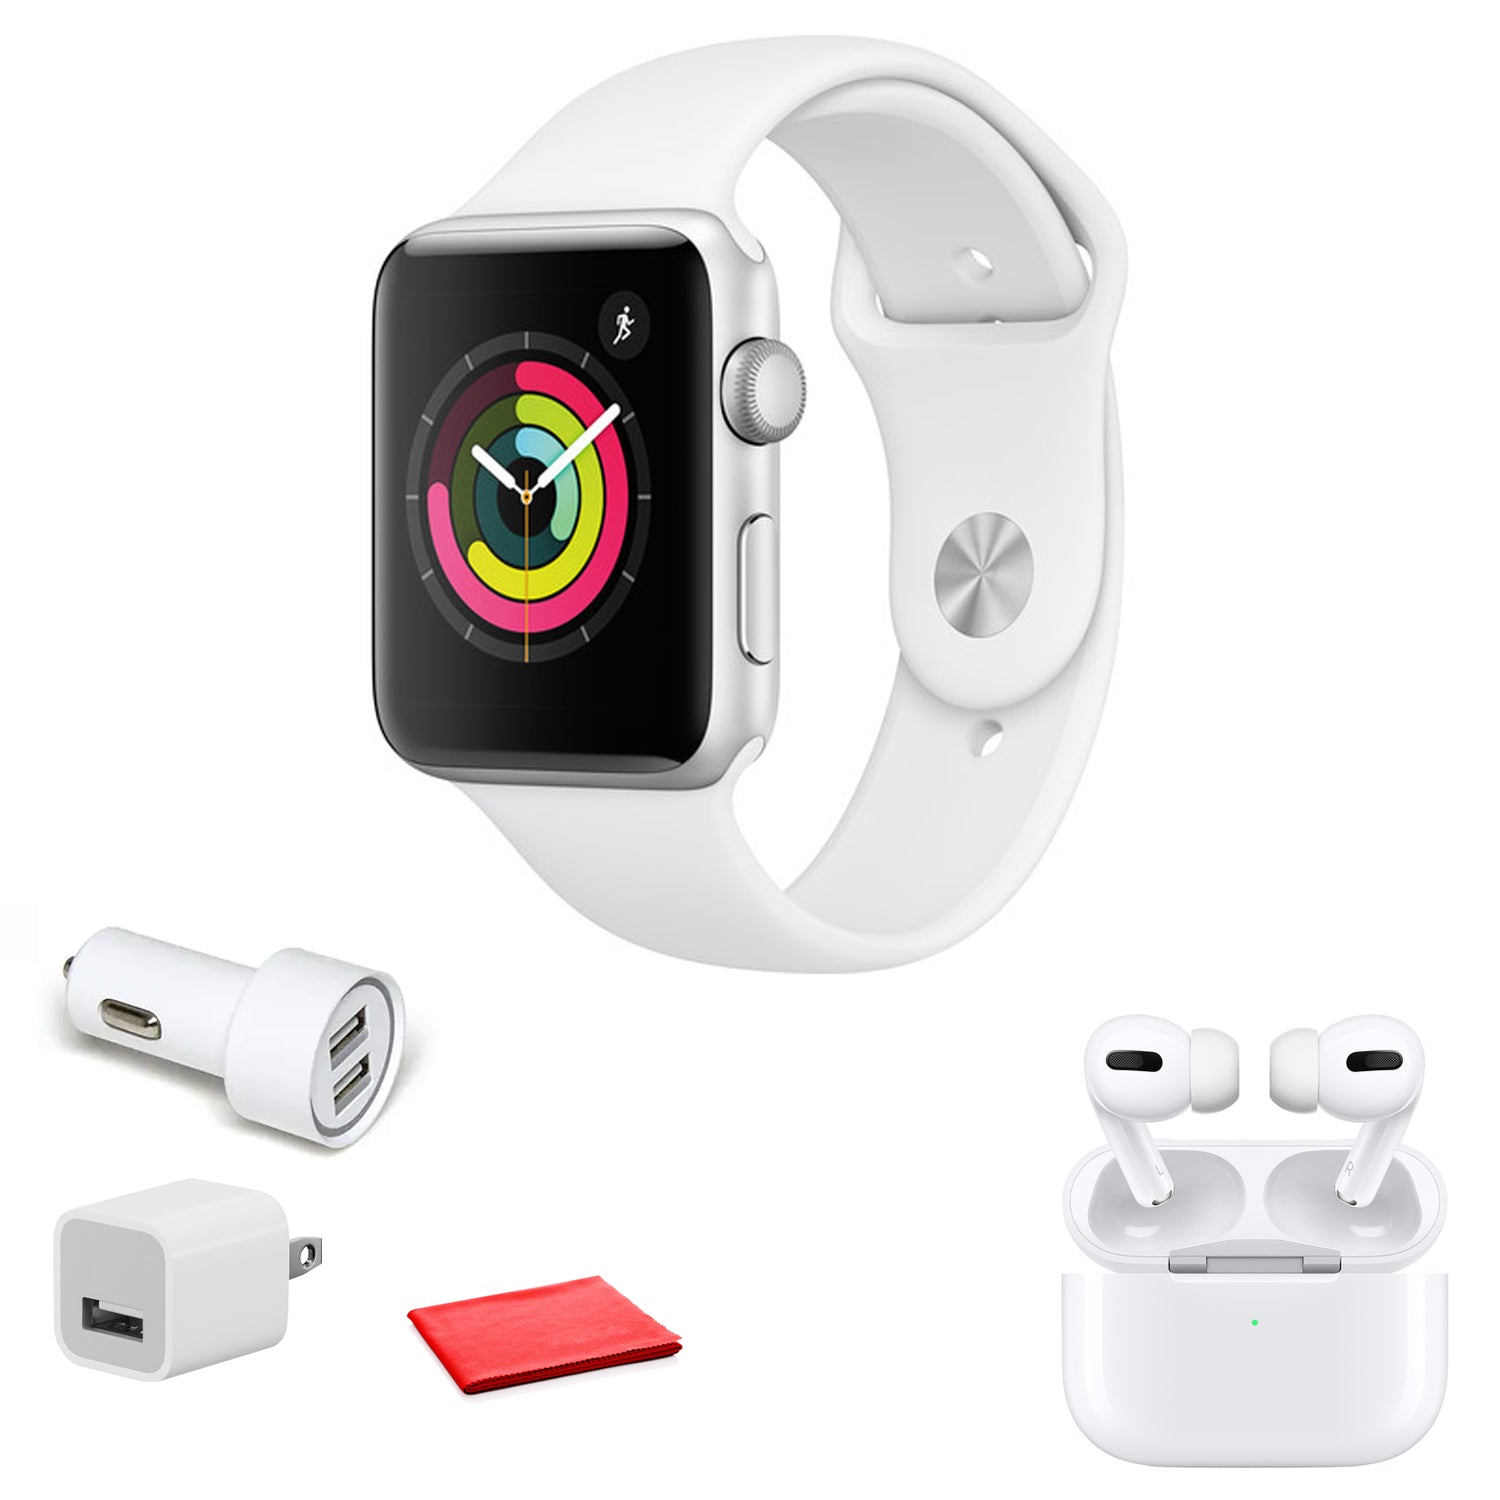 Apple Watch Series 3 Smartwatch (GPS Only, White Sport Band) with Apple AirPods Pro